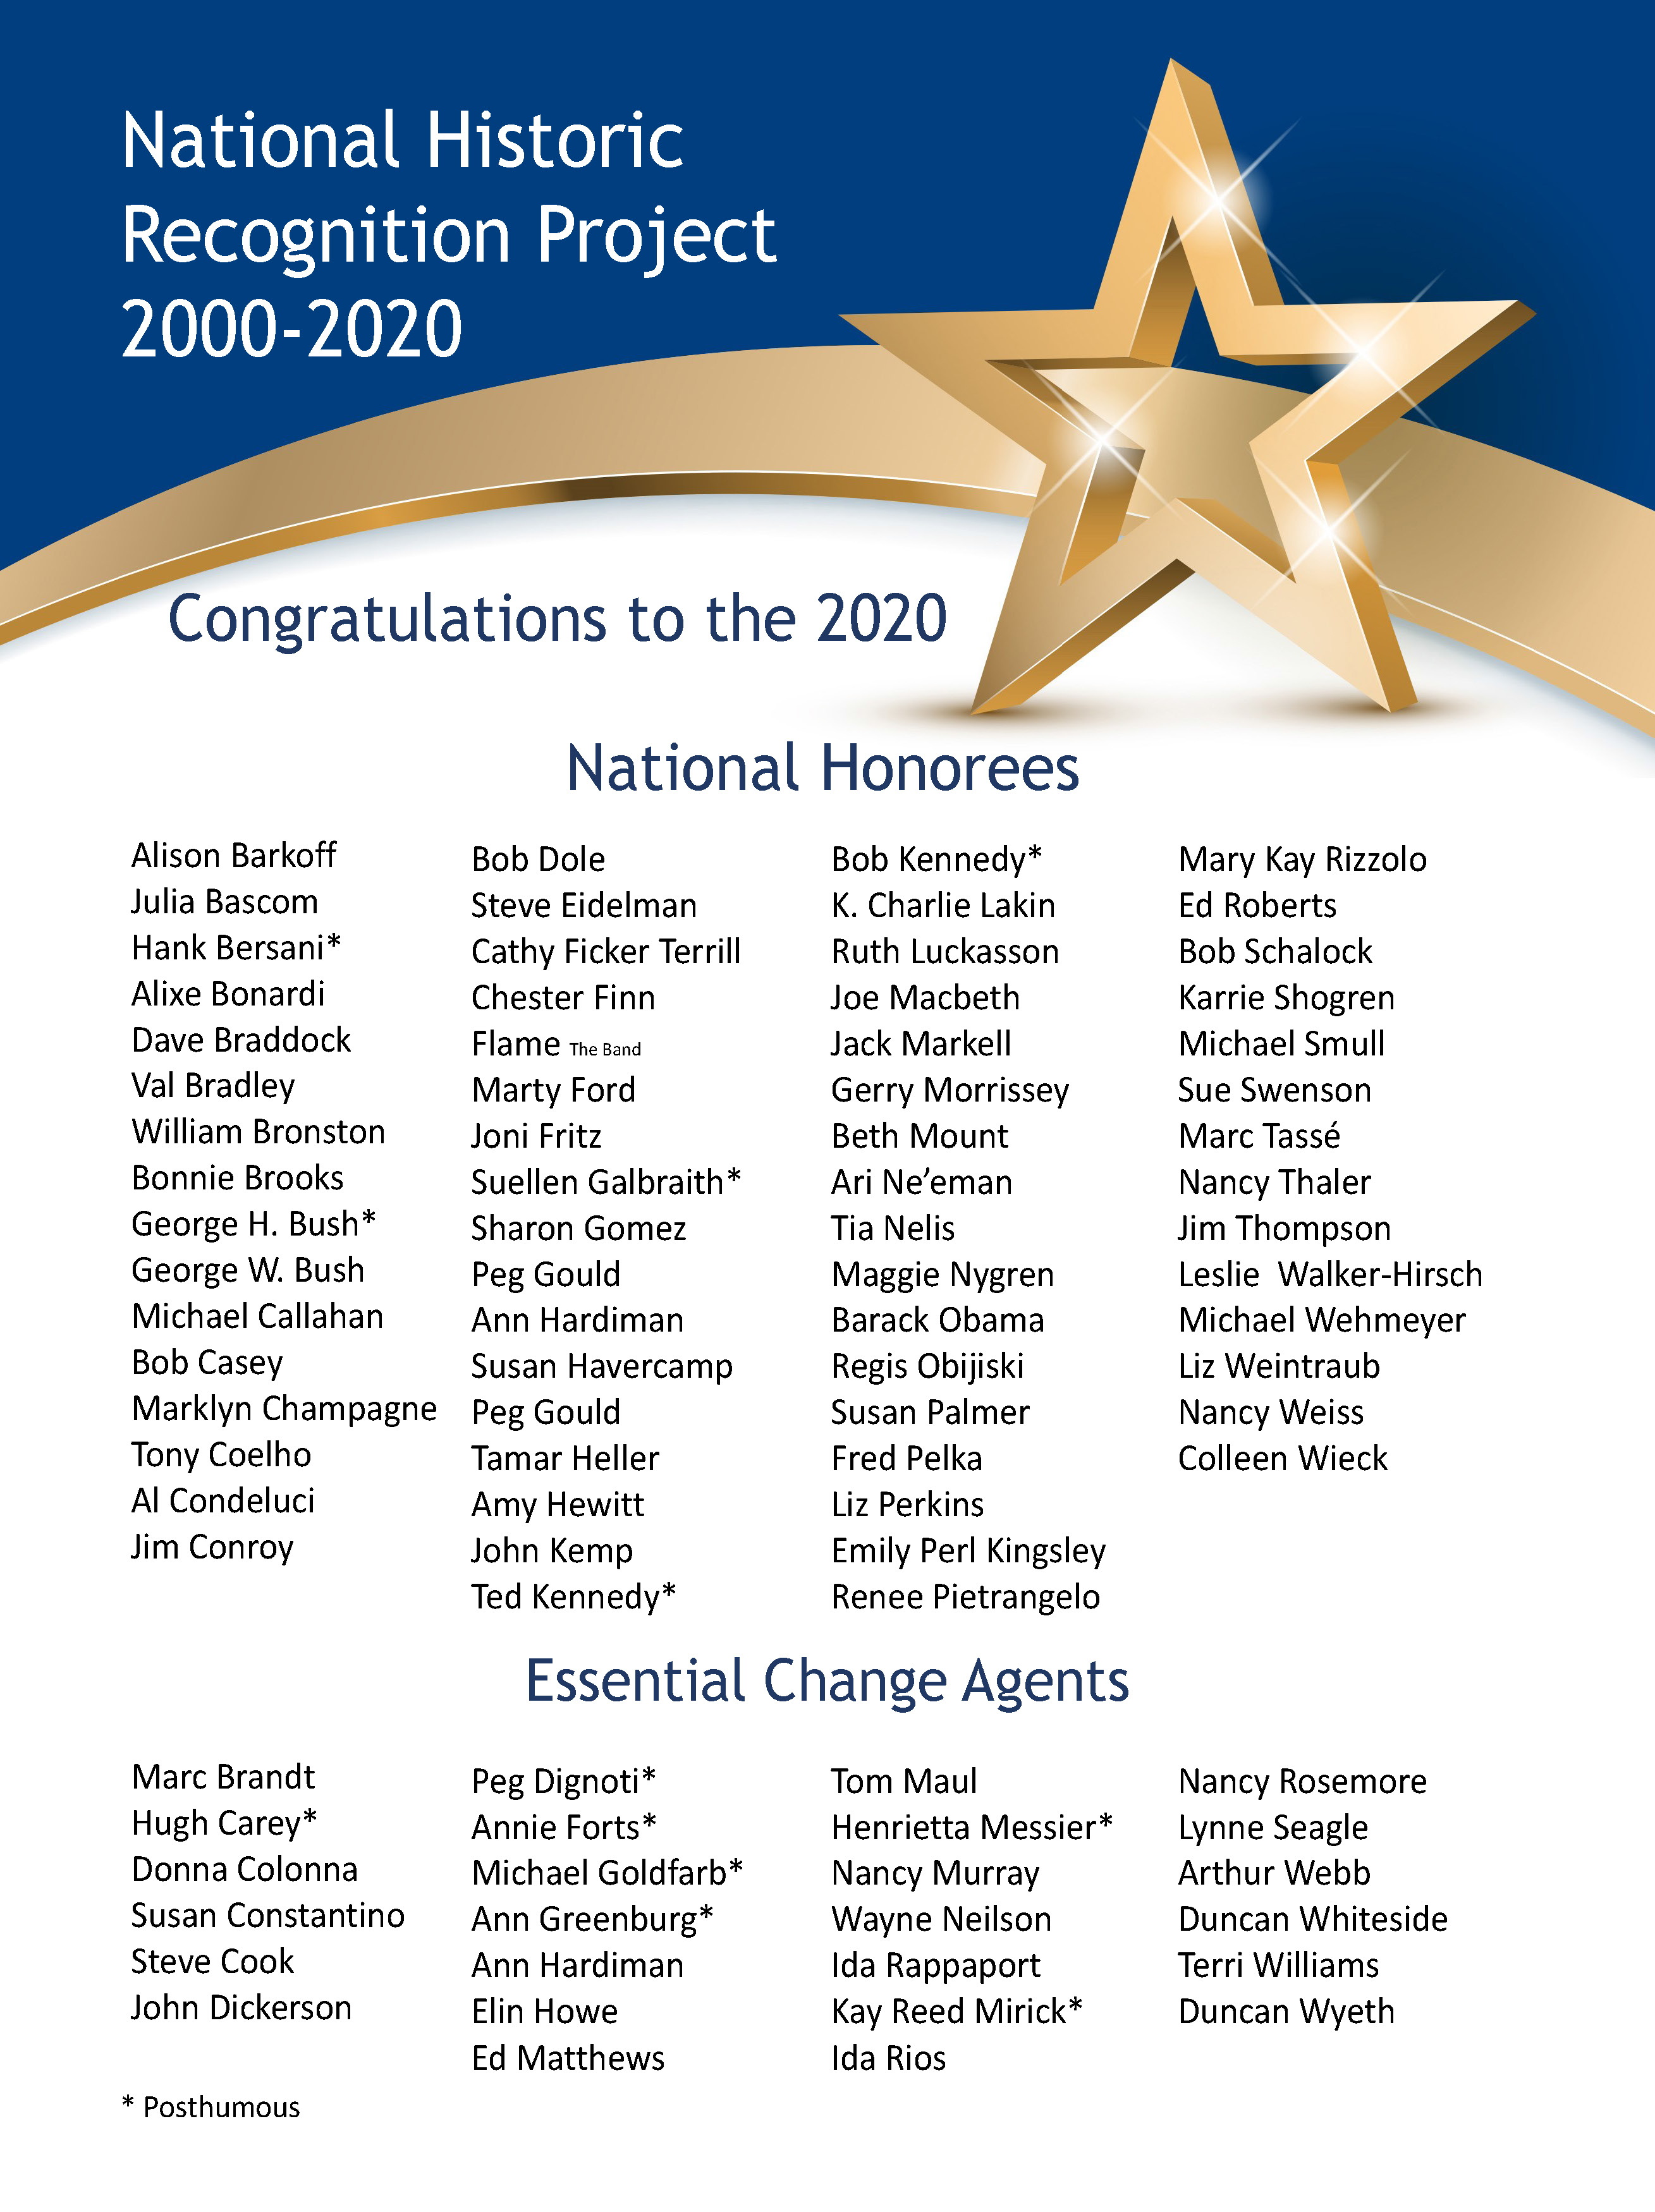 National Historic Recognition Project 2000-2020